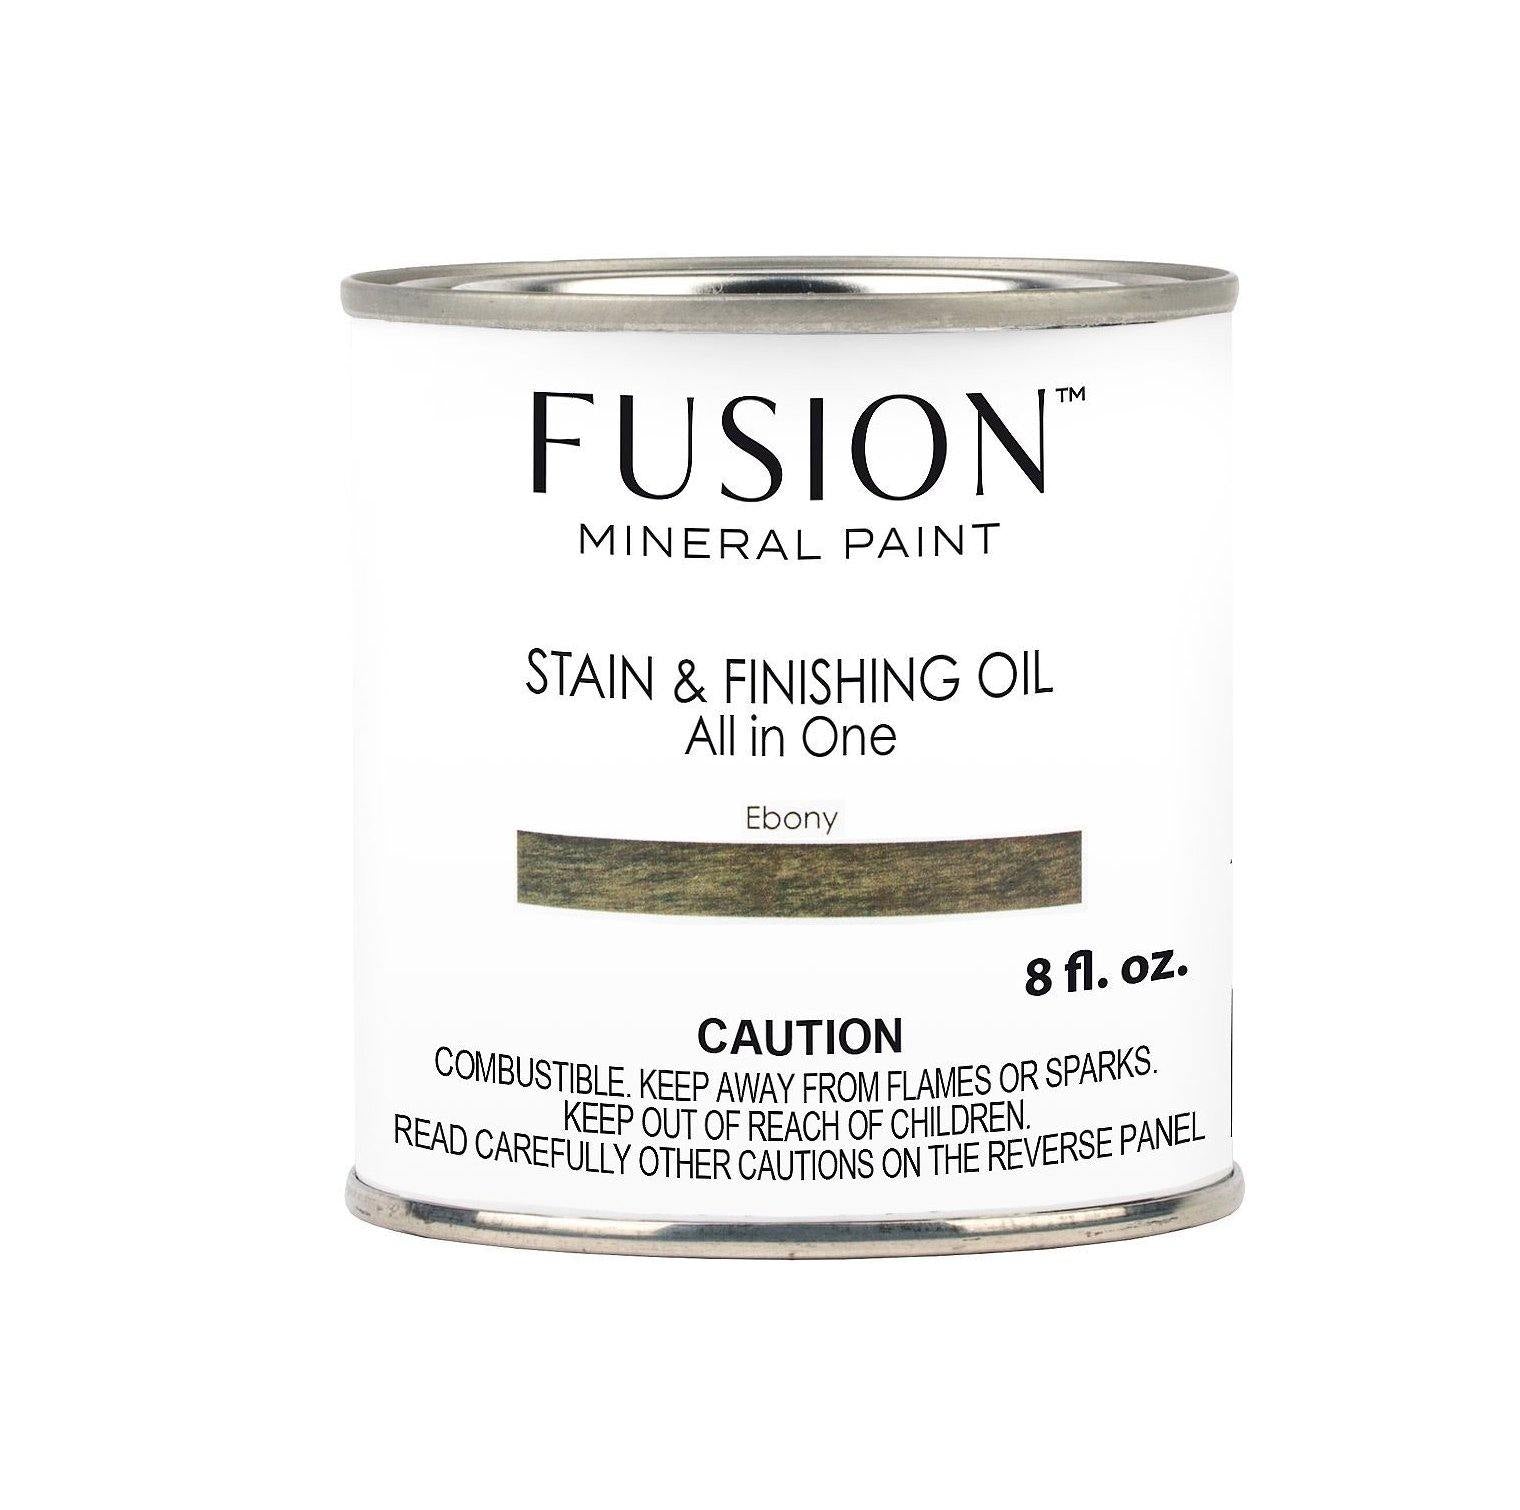 Fusion Mineral Paint Stain and Finishing Oil Ebony